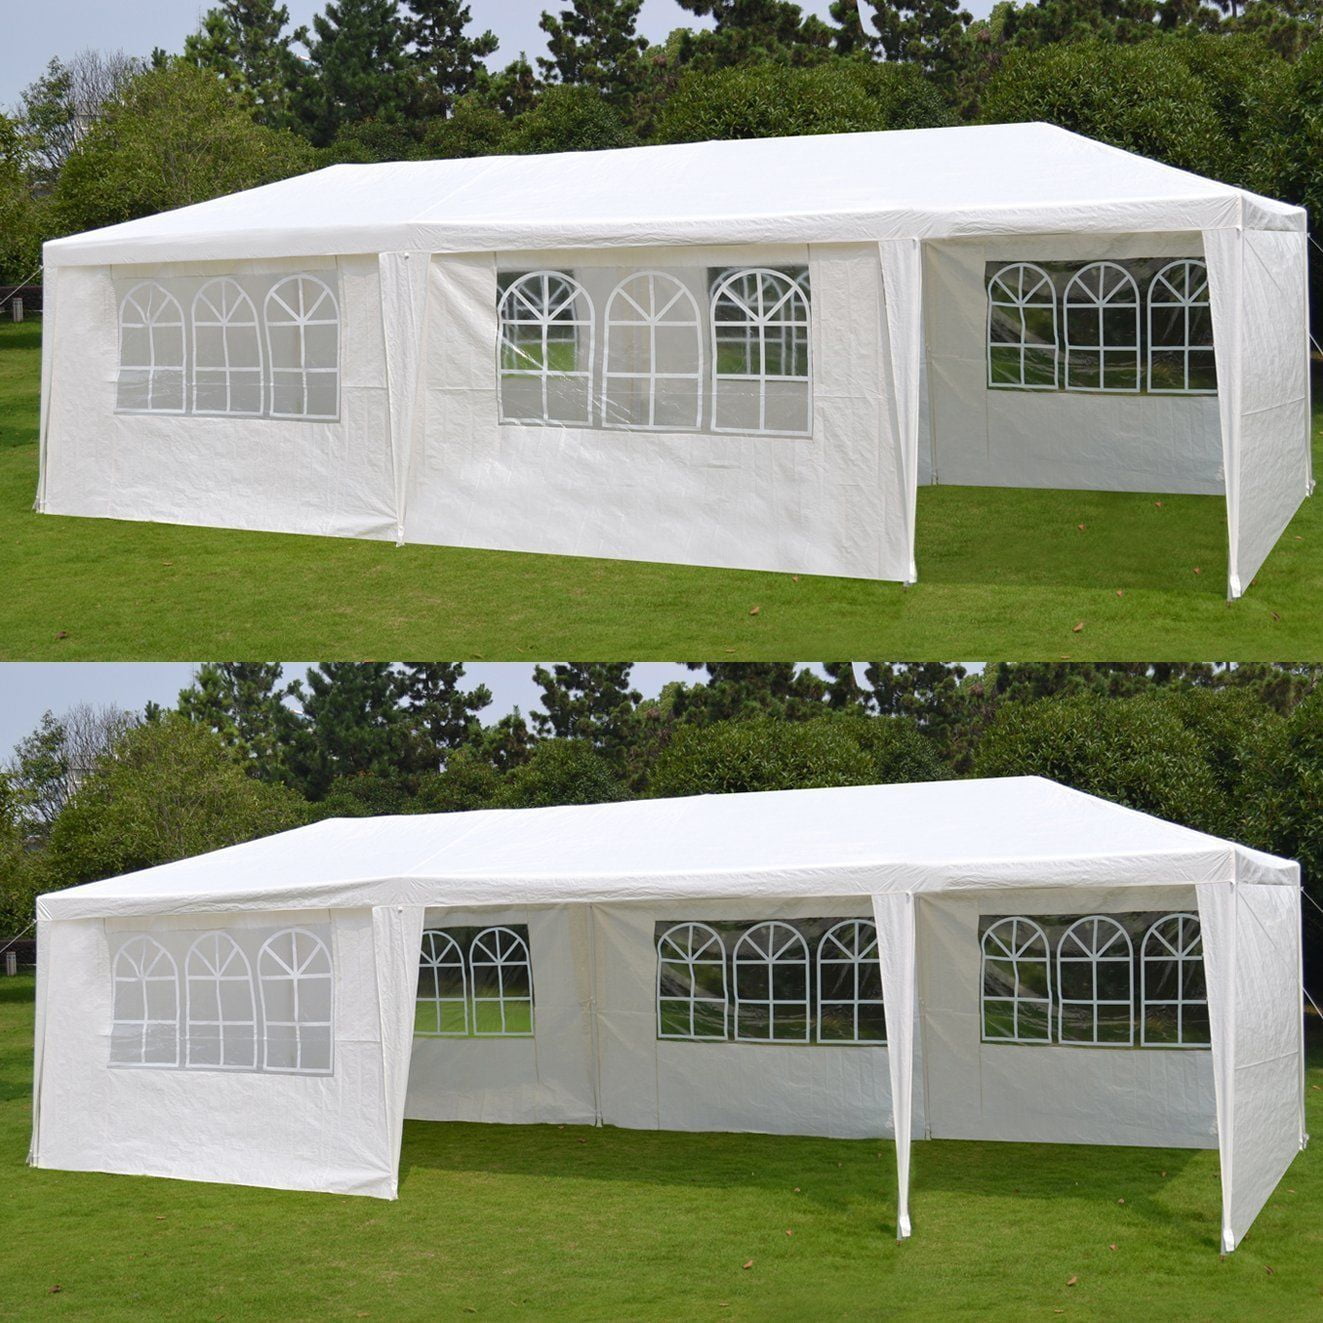 10'x30' Party Tent Canopy Outdoor Shelter  W/ 8 Sides Party Event Heavy Duty New 